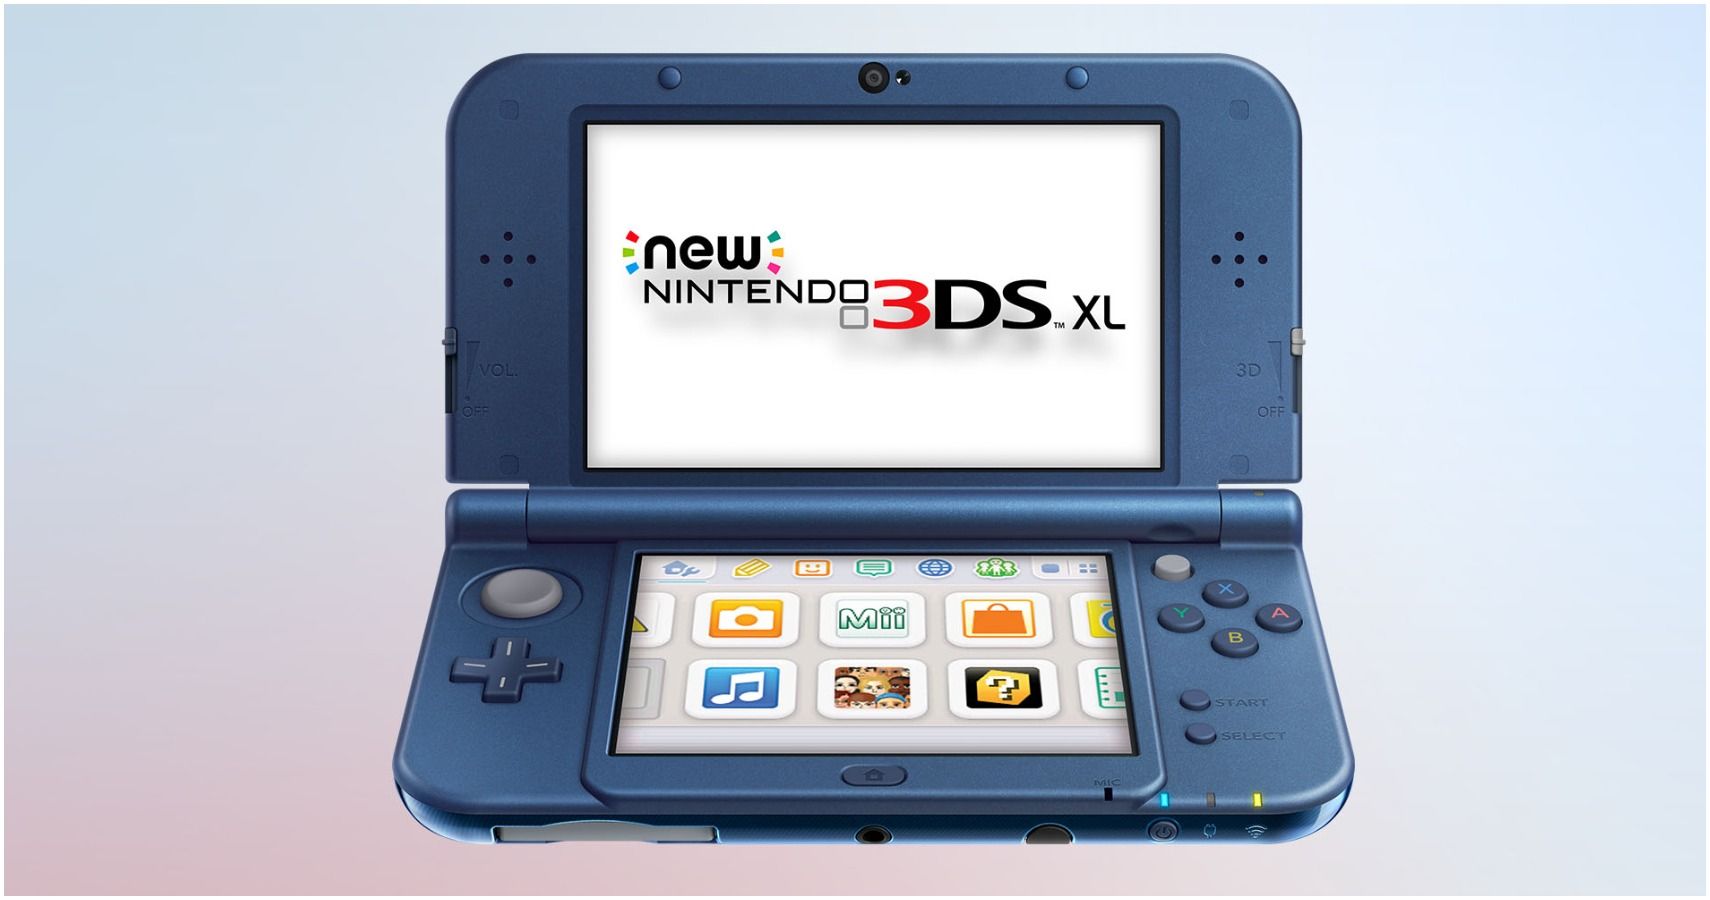 2018 The Final Year For The Nintendo 3DS?